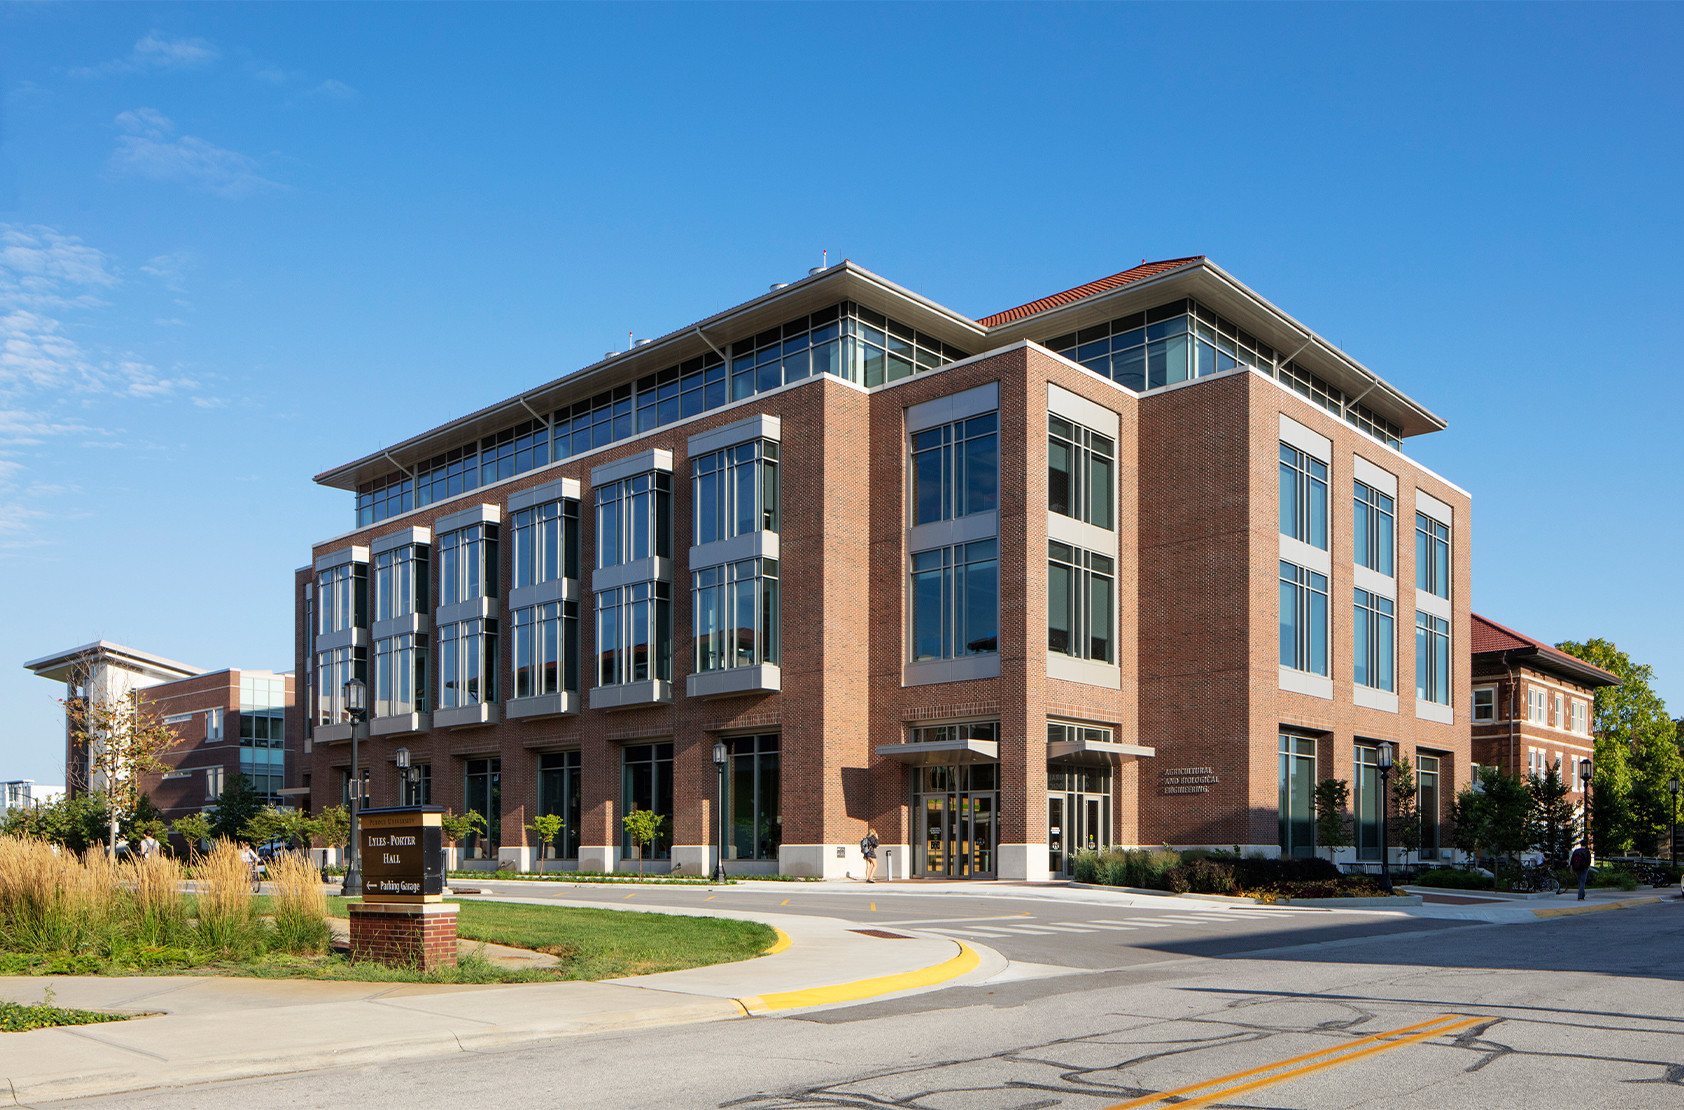 Purdue University - Agricultural and Biological Engineering Building